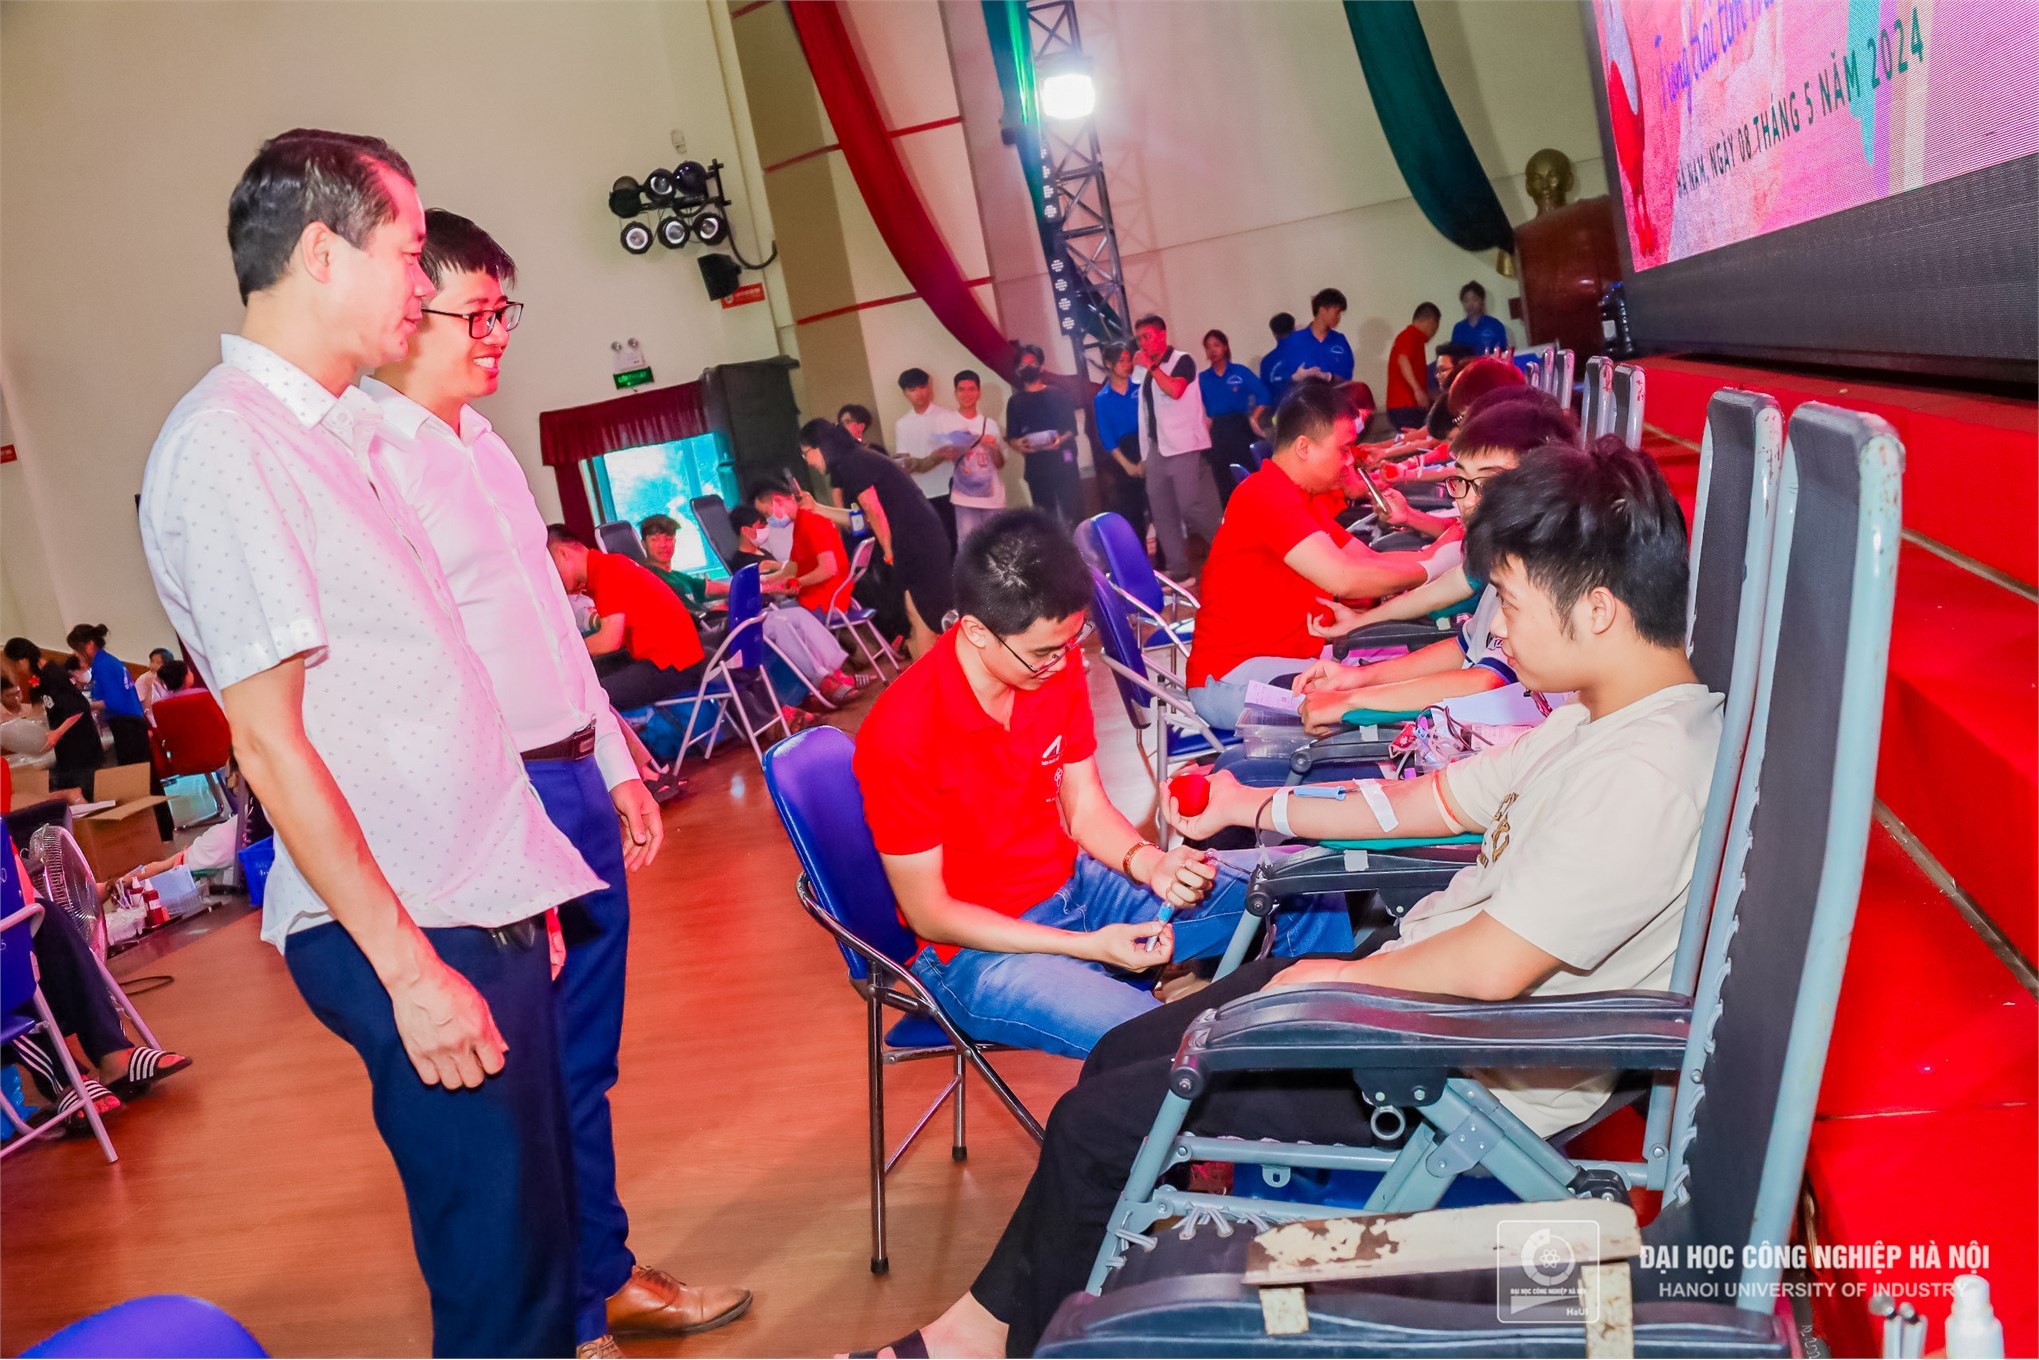 Hanoi University of Industry (HaUI) has once again demonstrated its commitment to humanitarian causes by successfully organizing the Blood Donation Festival 2024. 